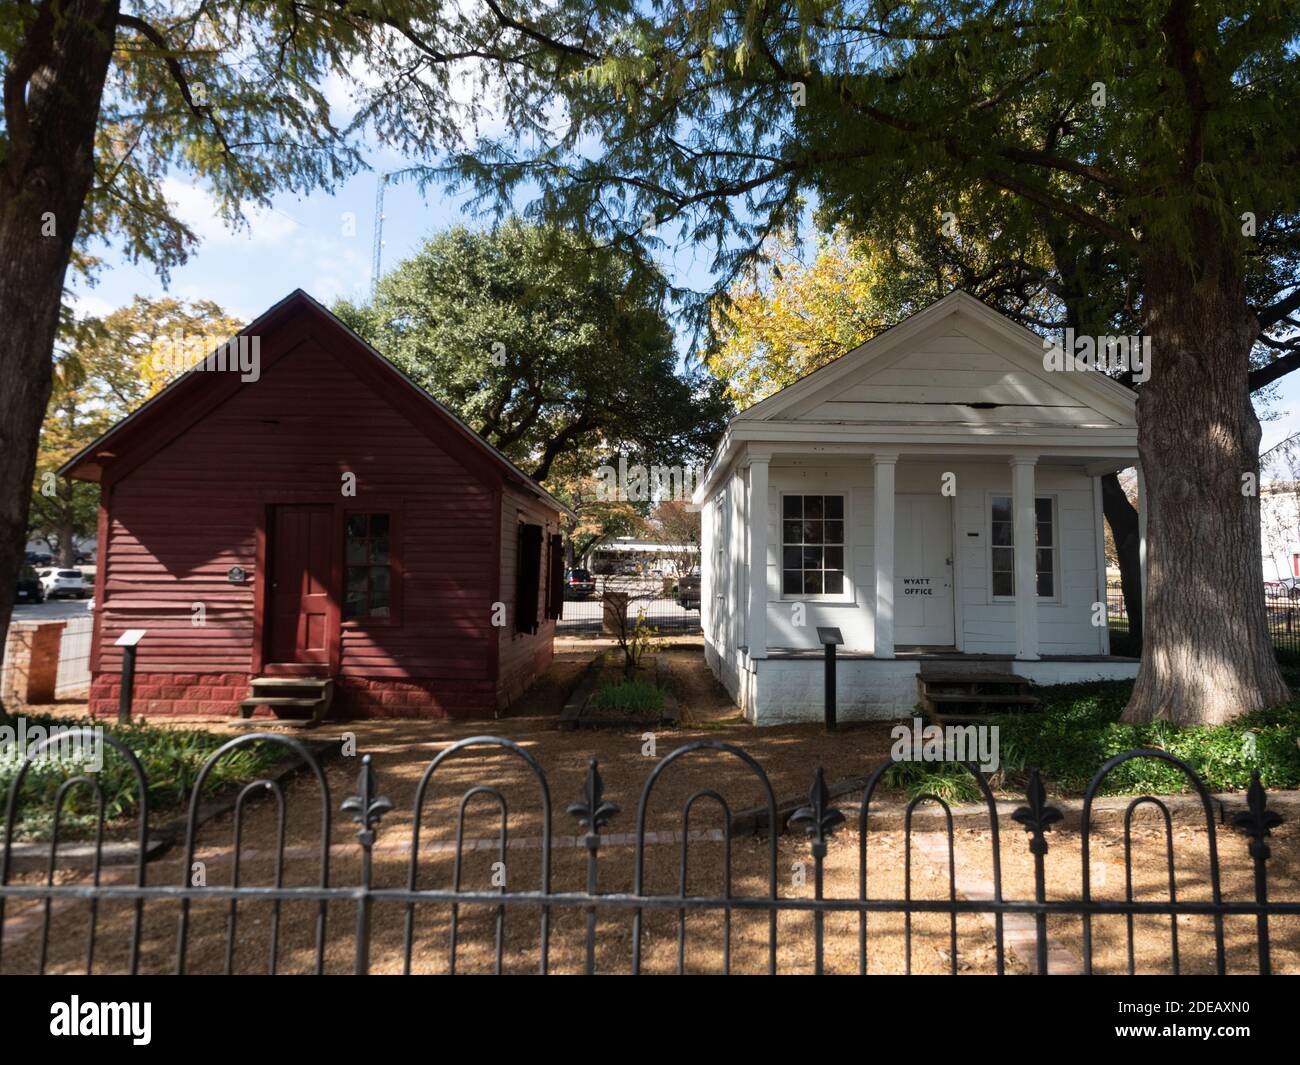 Old Wyatt Office, a Greek Revival building with columns, and the Calaboose, a former jail, in Waxahachie, Texas beneath deciduous trees. Stock Photo